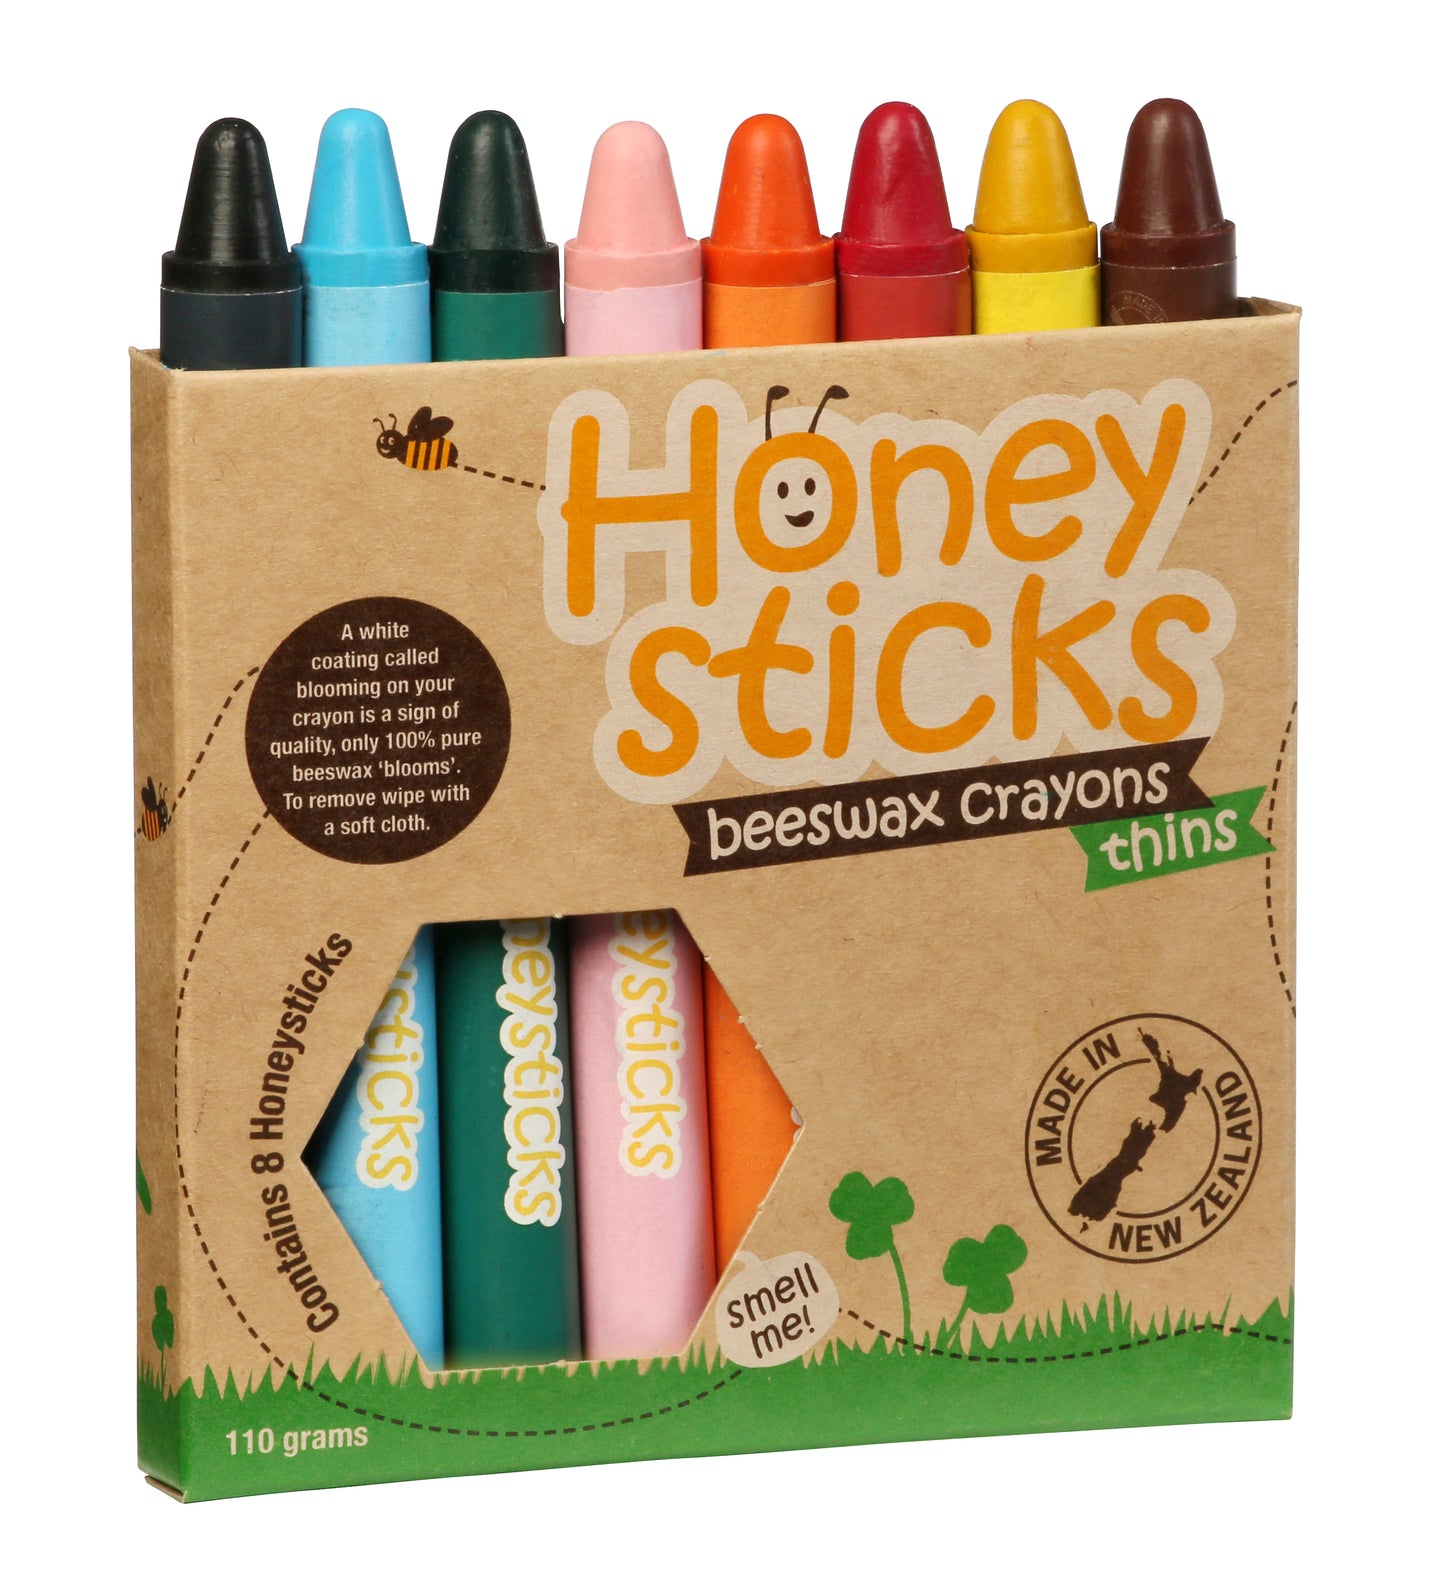 Beeswax Crayons Thins (4-6 yr) - Little Reef and Friends